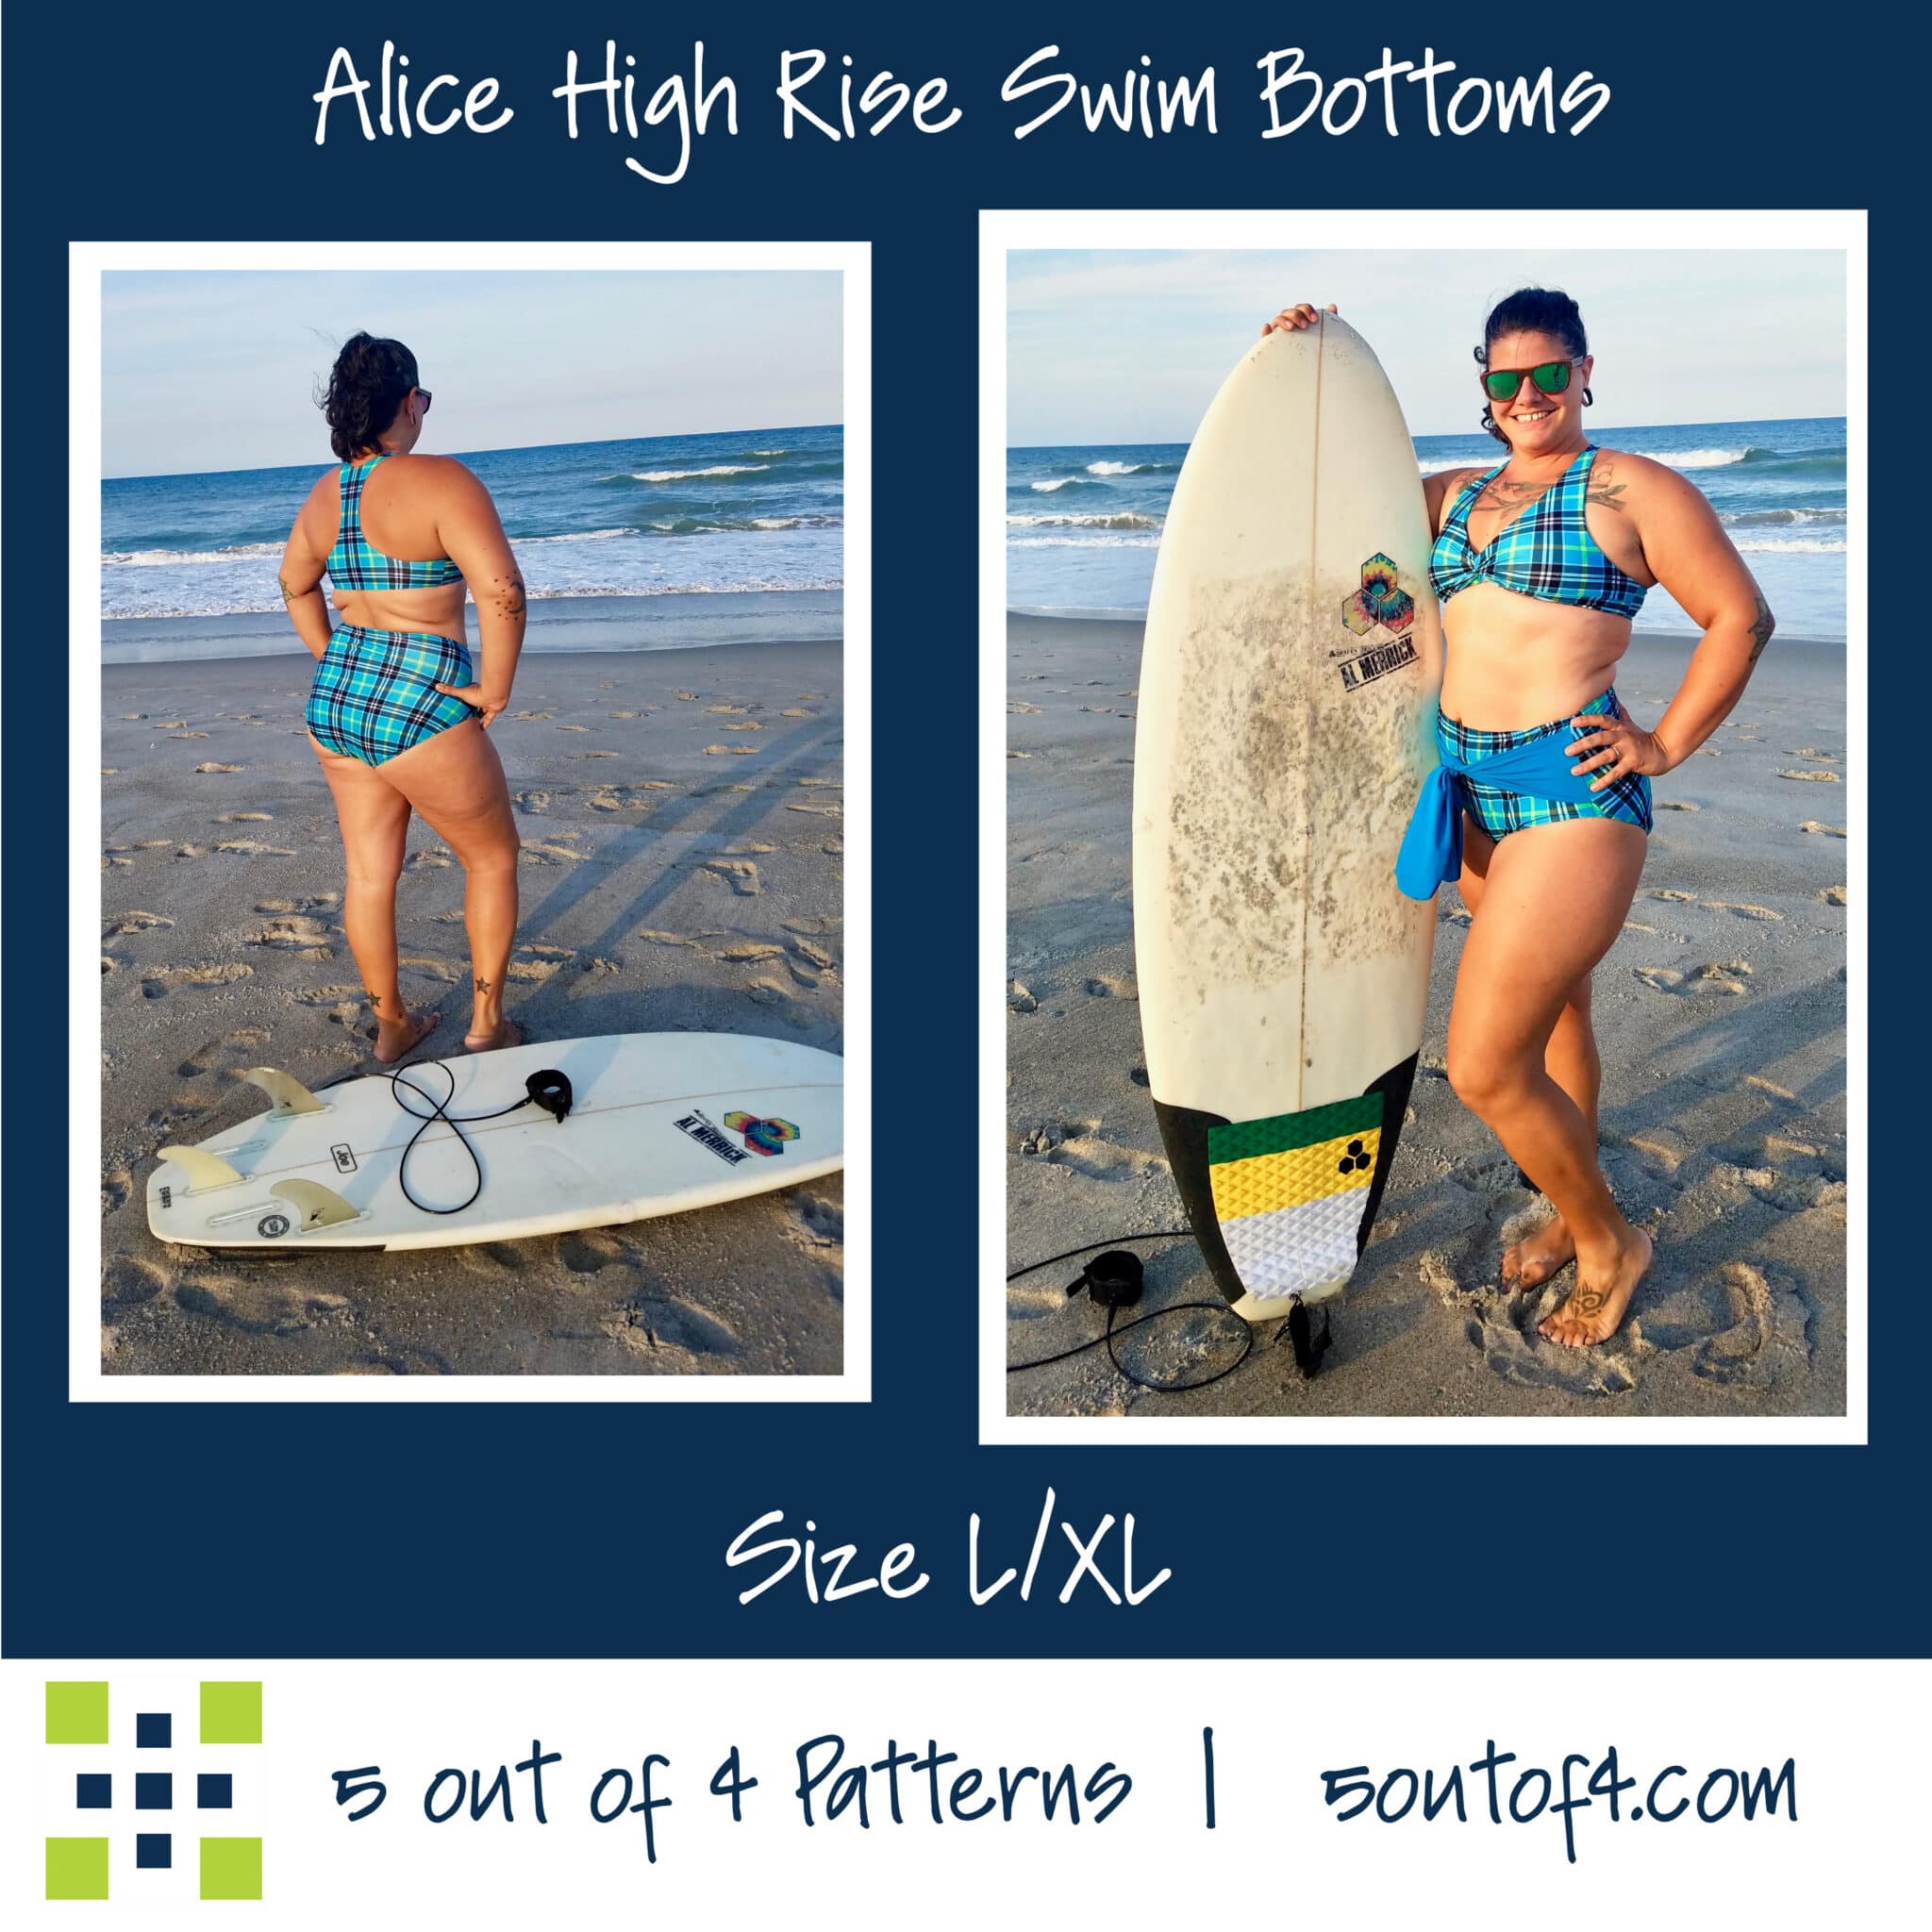 Alice and Ruth Swim Bottoms Bundle - 5 out of 4 Patterns